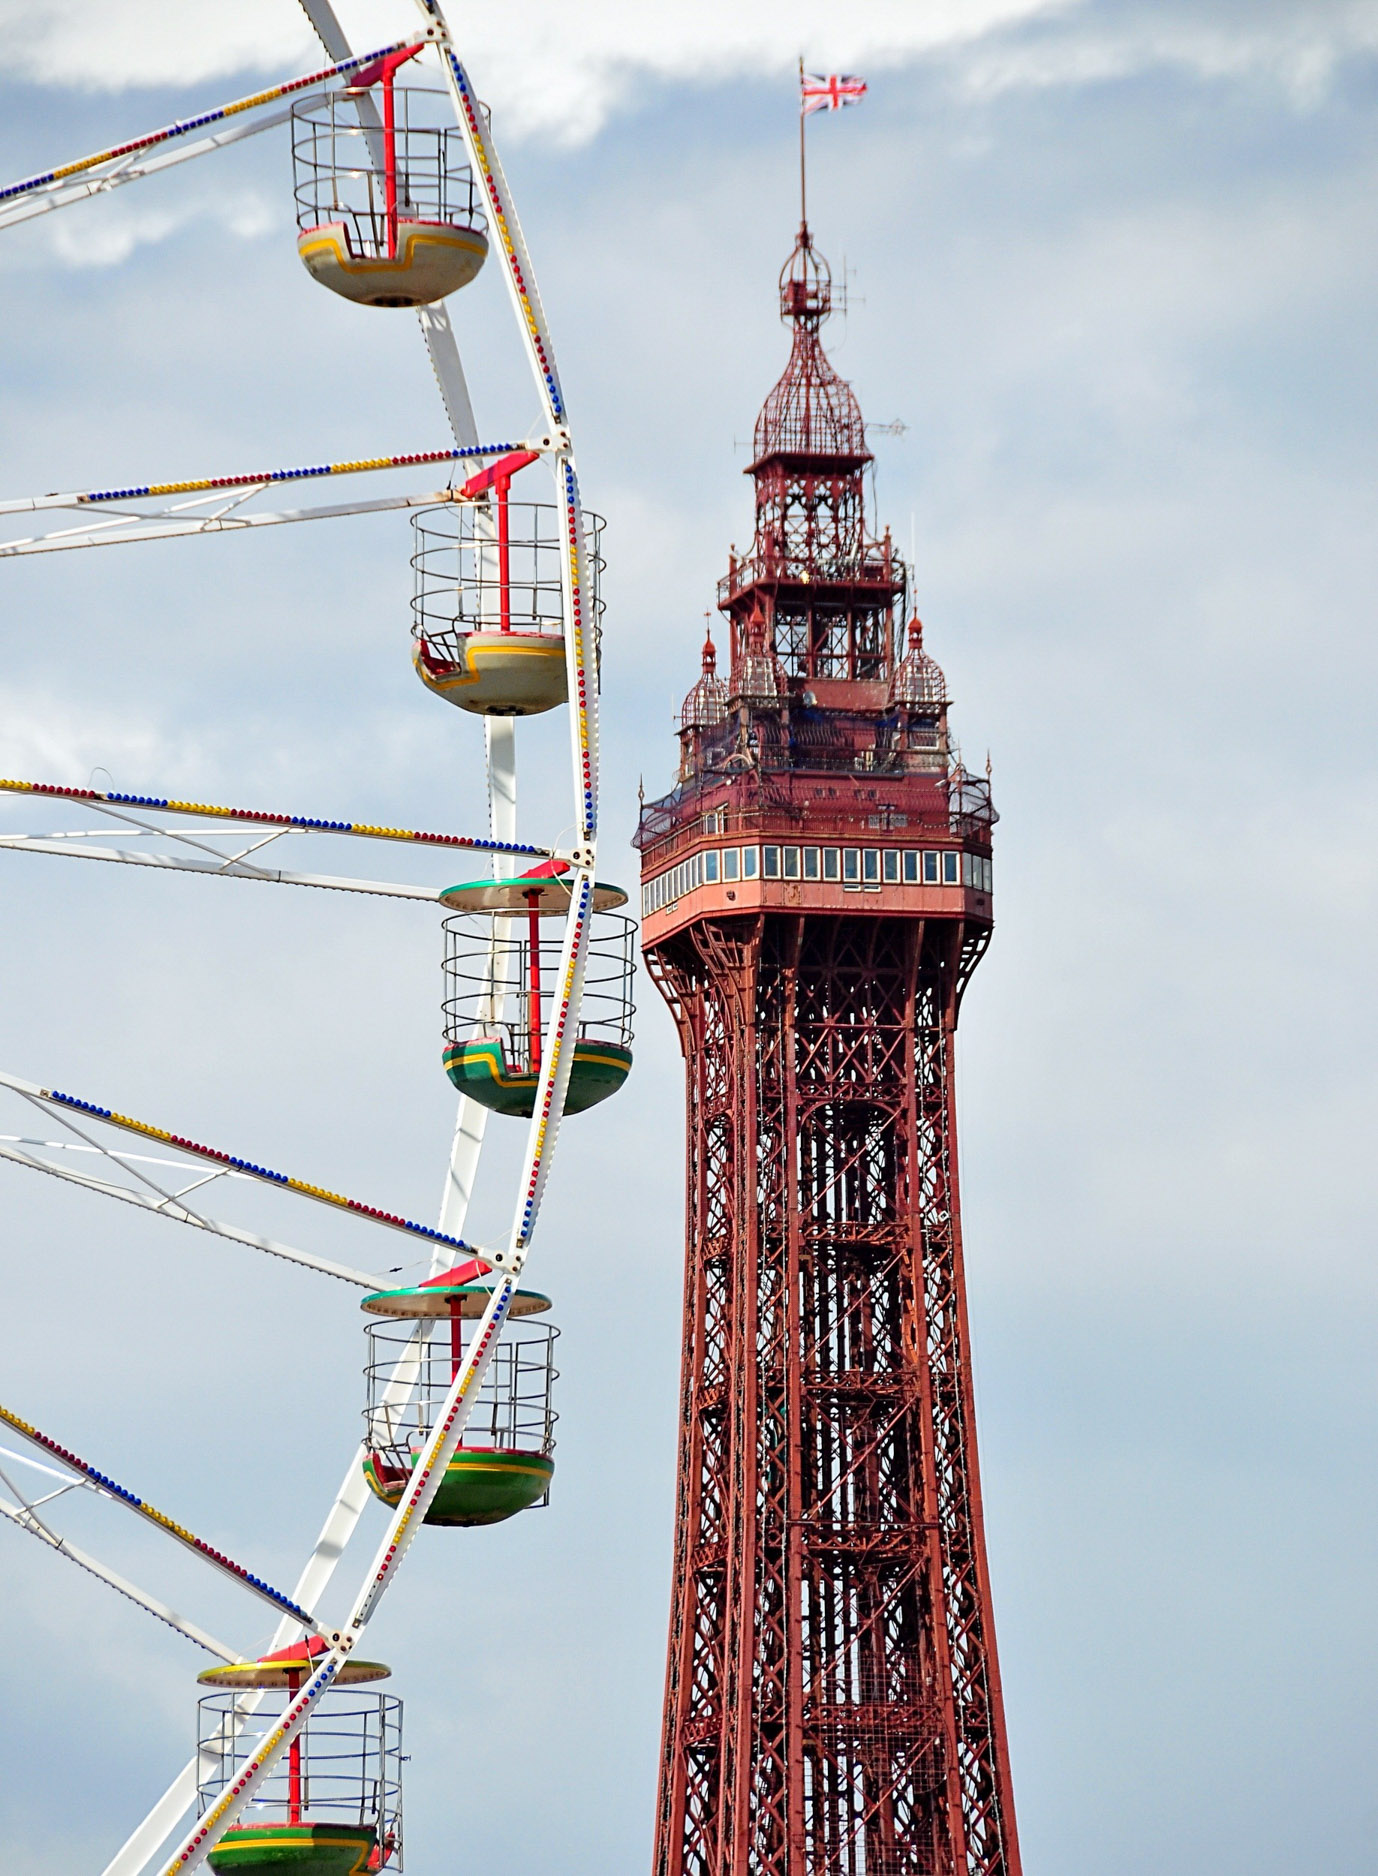 Blackpool Tower in Blackpool Photo: Barrie Taylor Pixabay